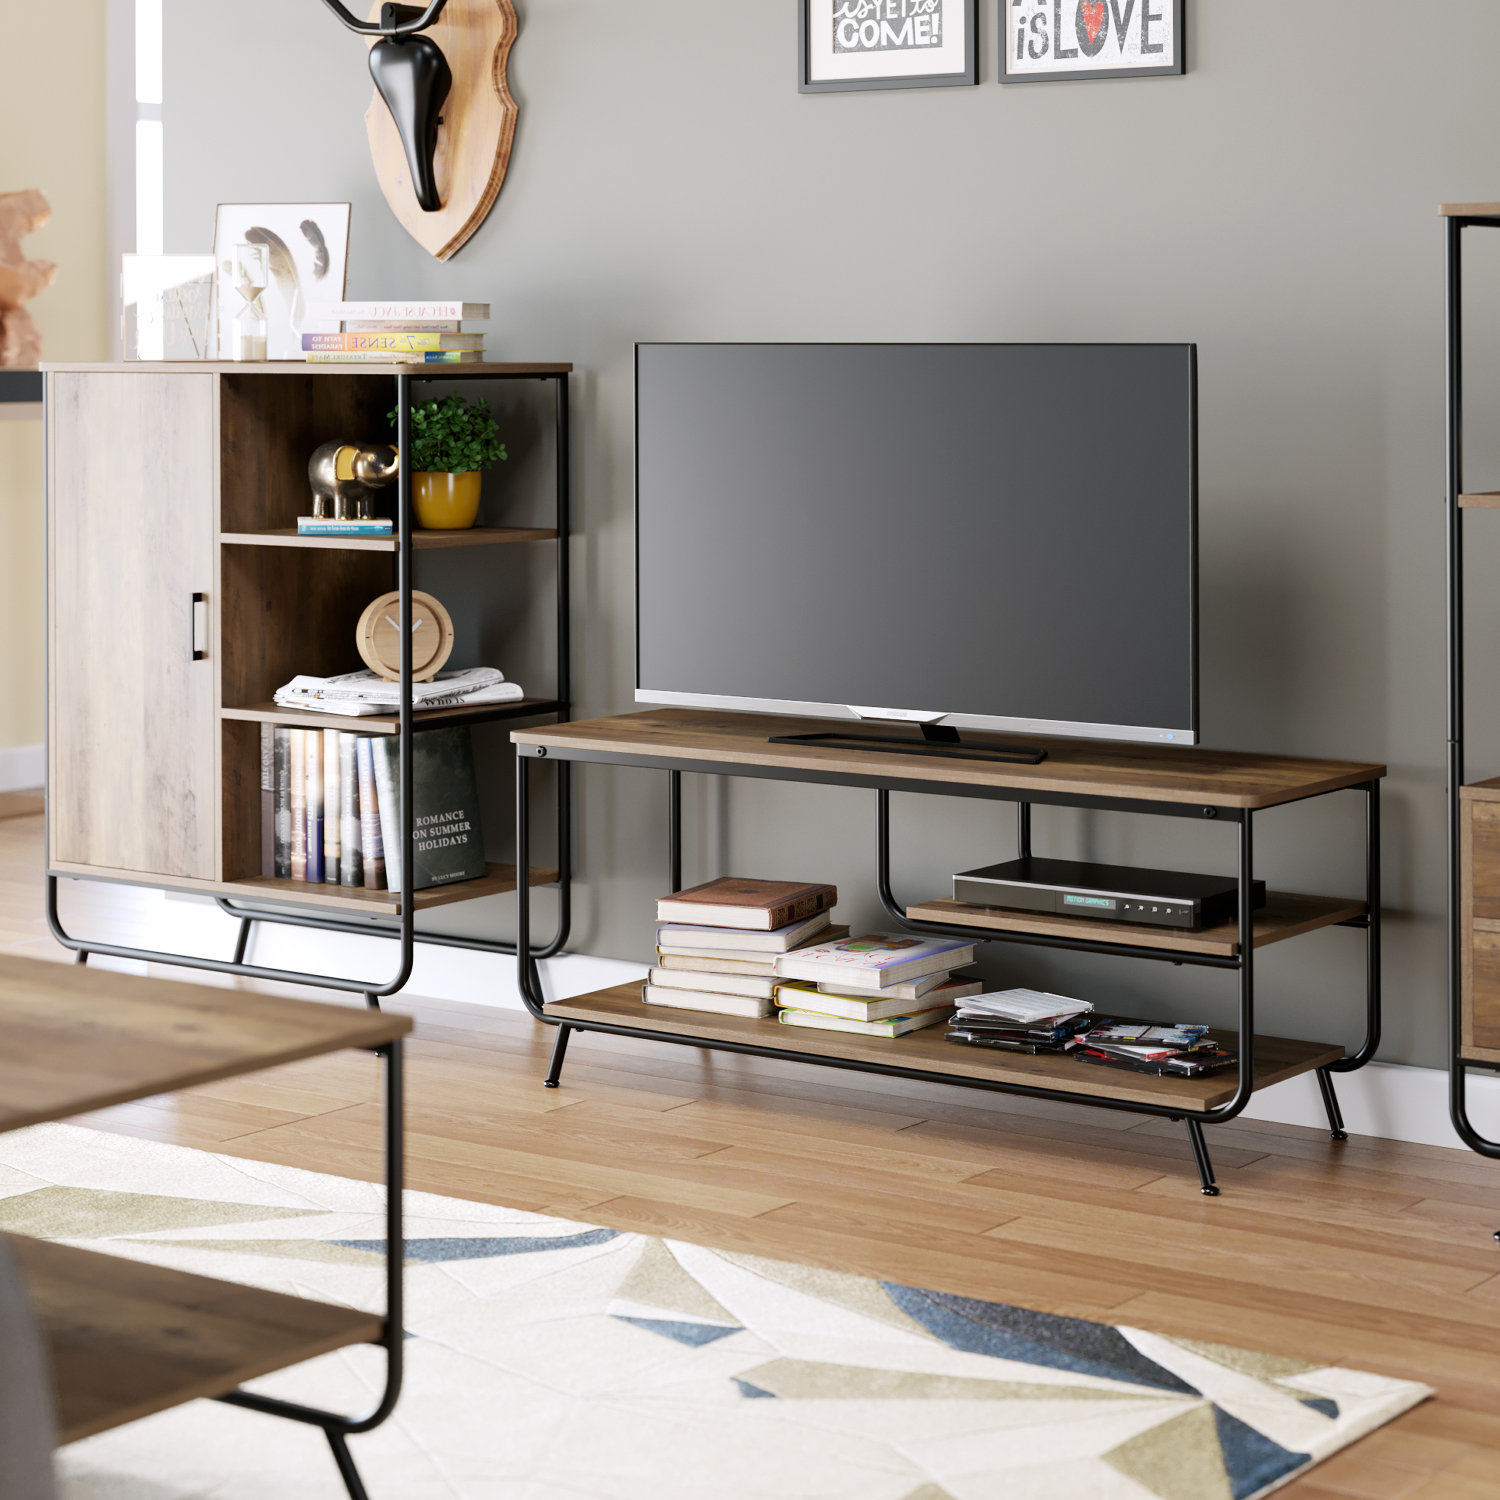 Spellman TV Stand for TVs up to 55